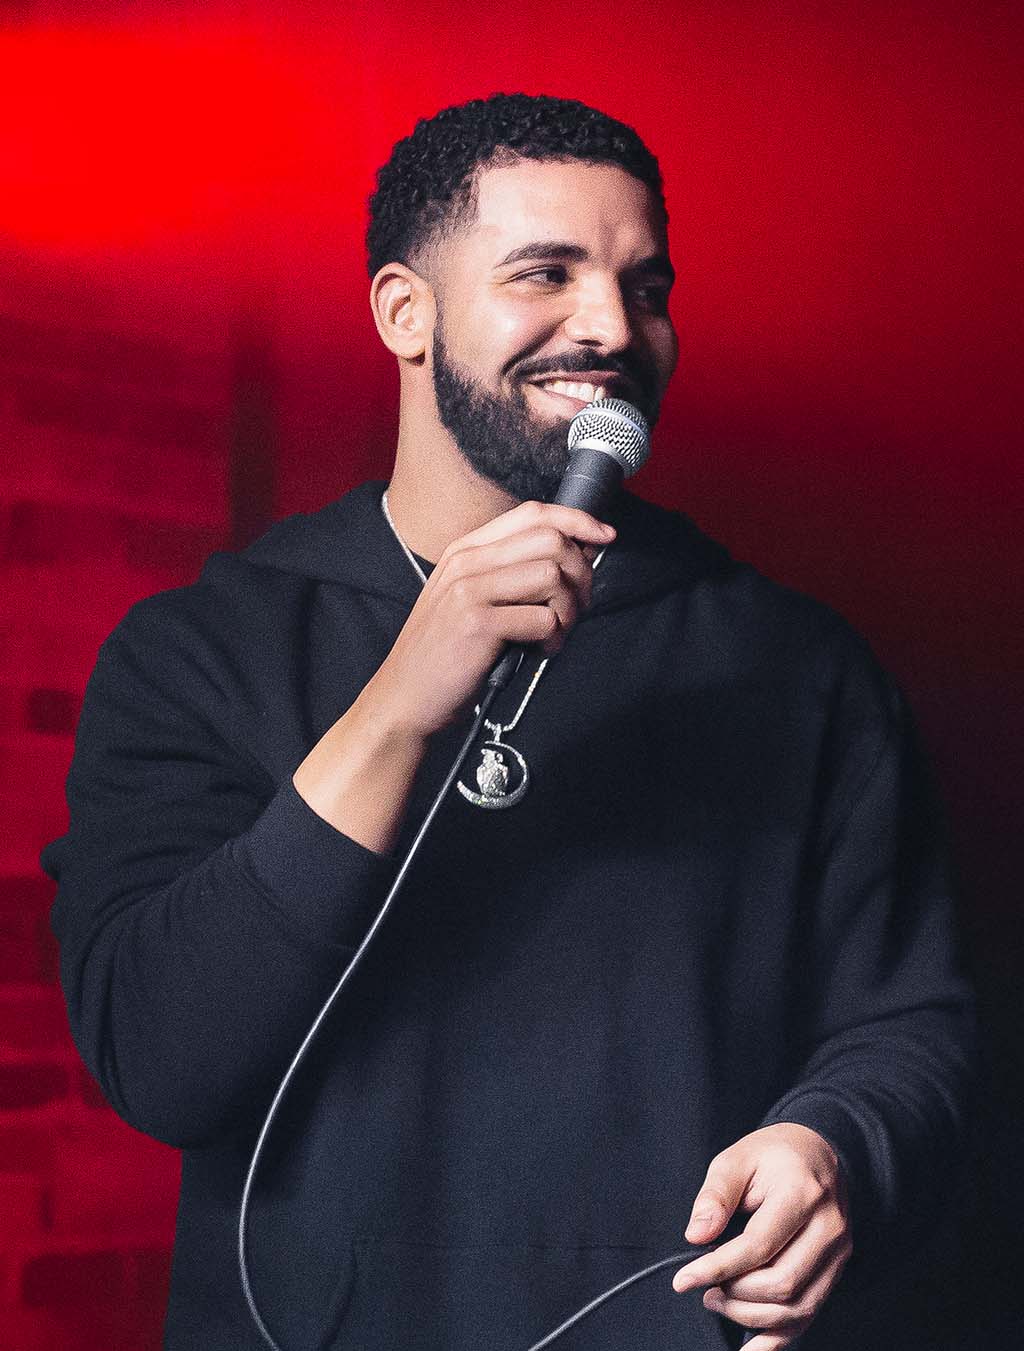 likhoa on the occasion of his th birthday drake surprised everyone by sharing for the first time the inside of his million luxury private jet 65637c44b7f1f On The Occasion Of His 37th Birthday, Drake Surprised Everyone By Sharing For The First Time The Inside Of His $63.3 Million Luxury Private Jet.